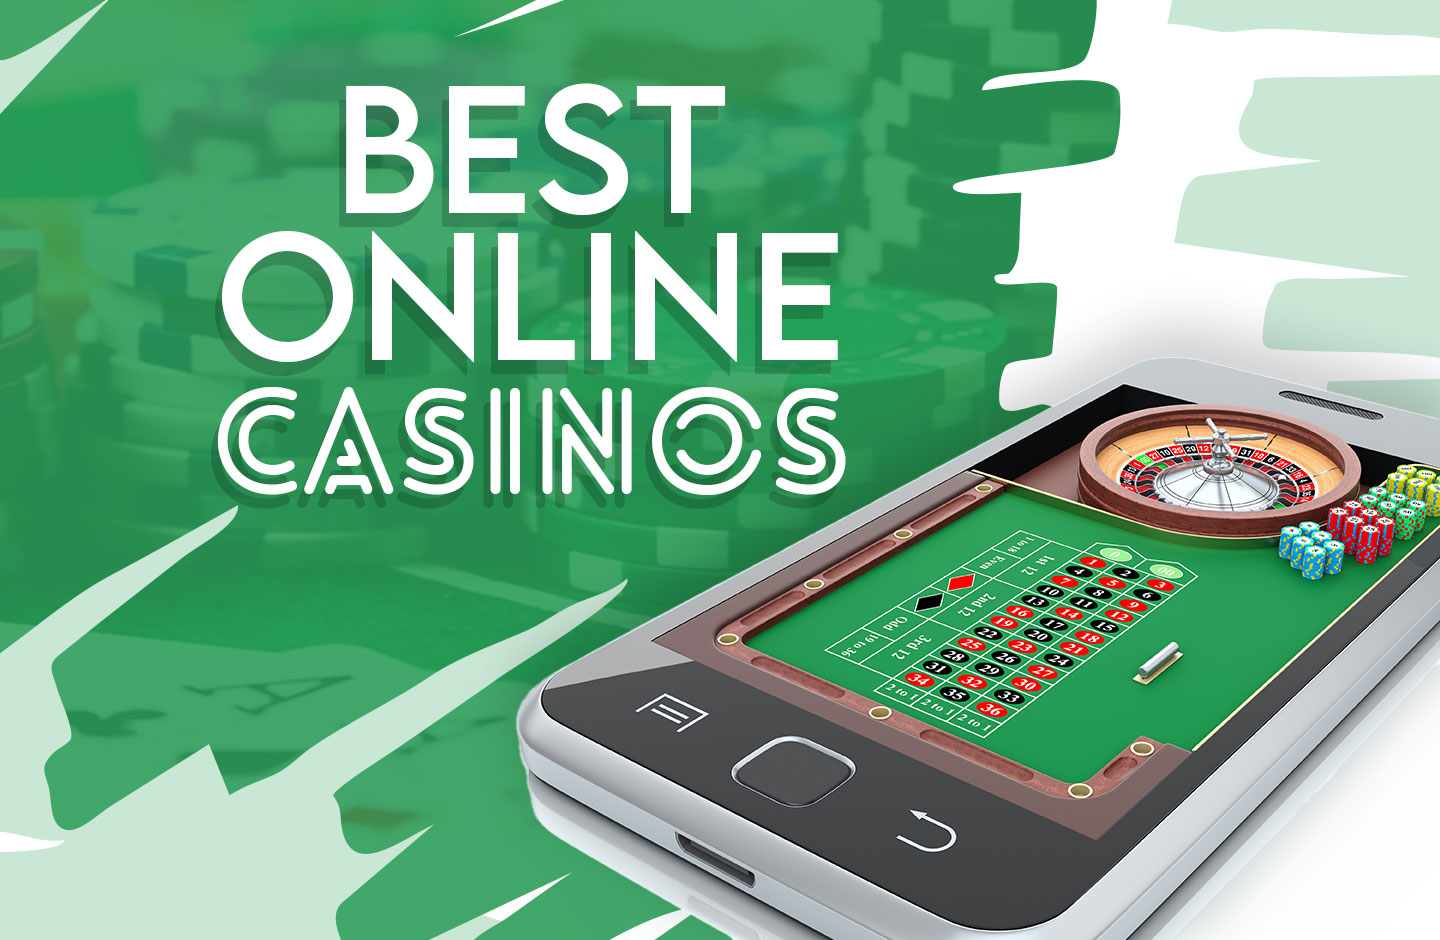 10+ Best Online Casinos (2023): Real Money Casino Sites for BIG Payout